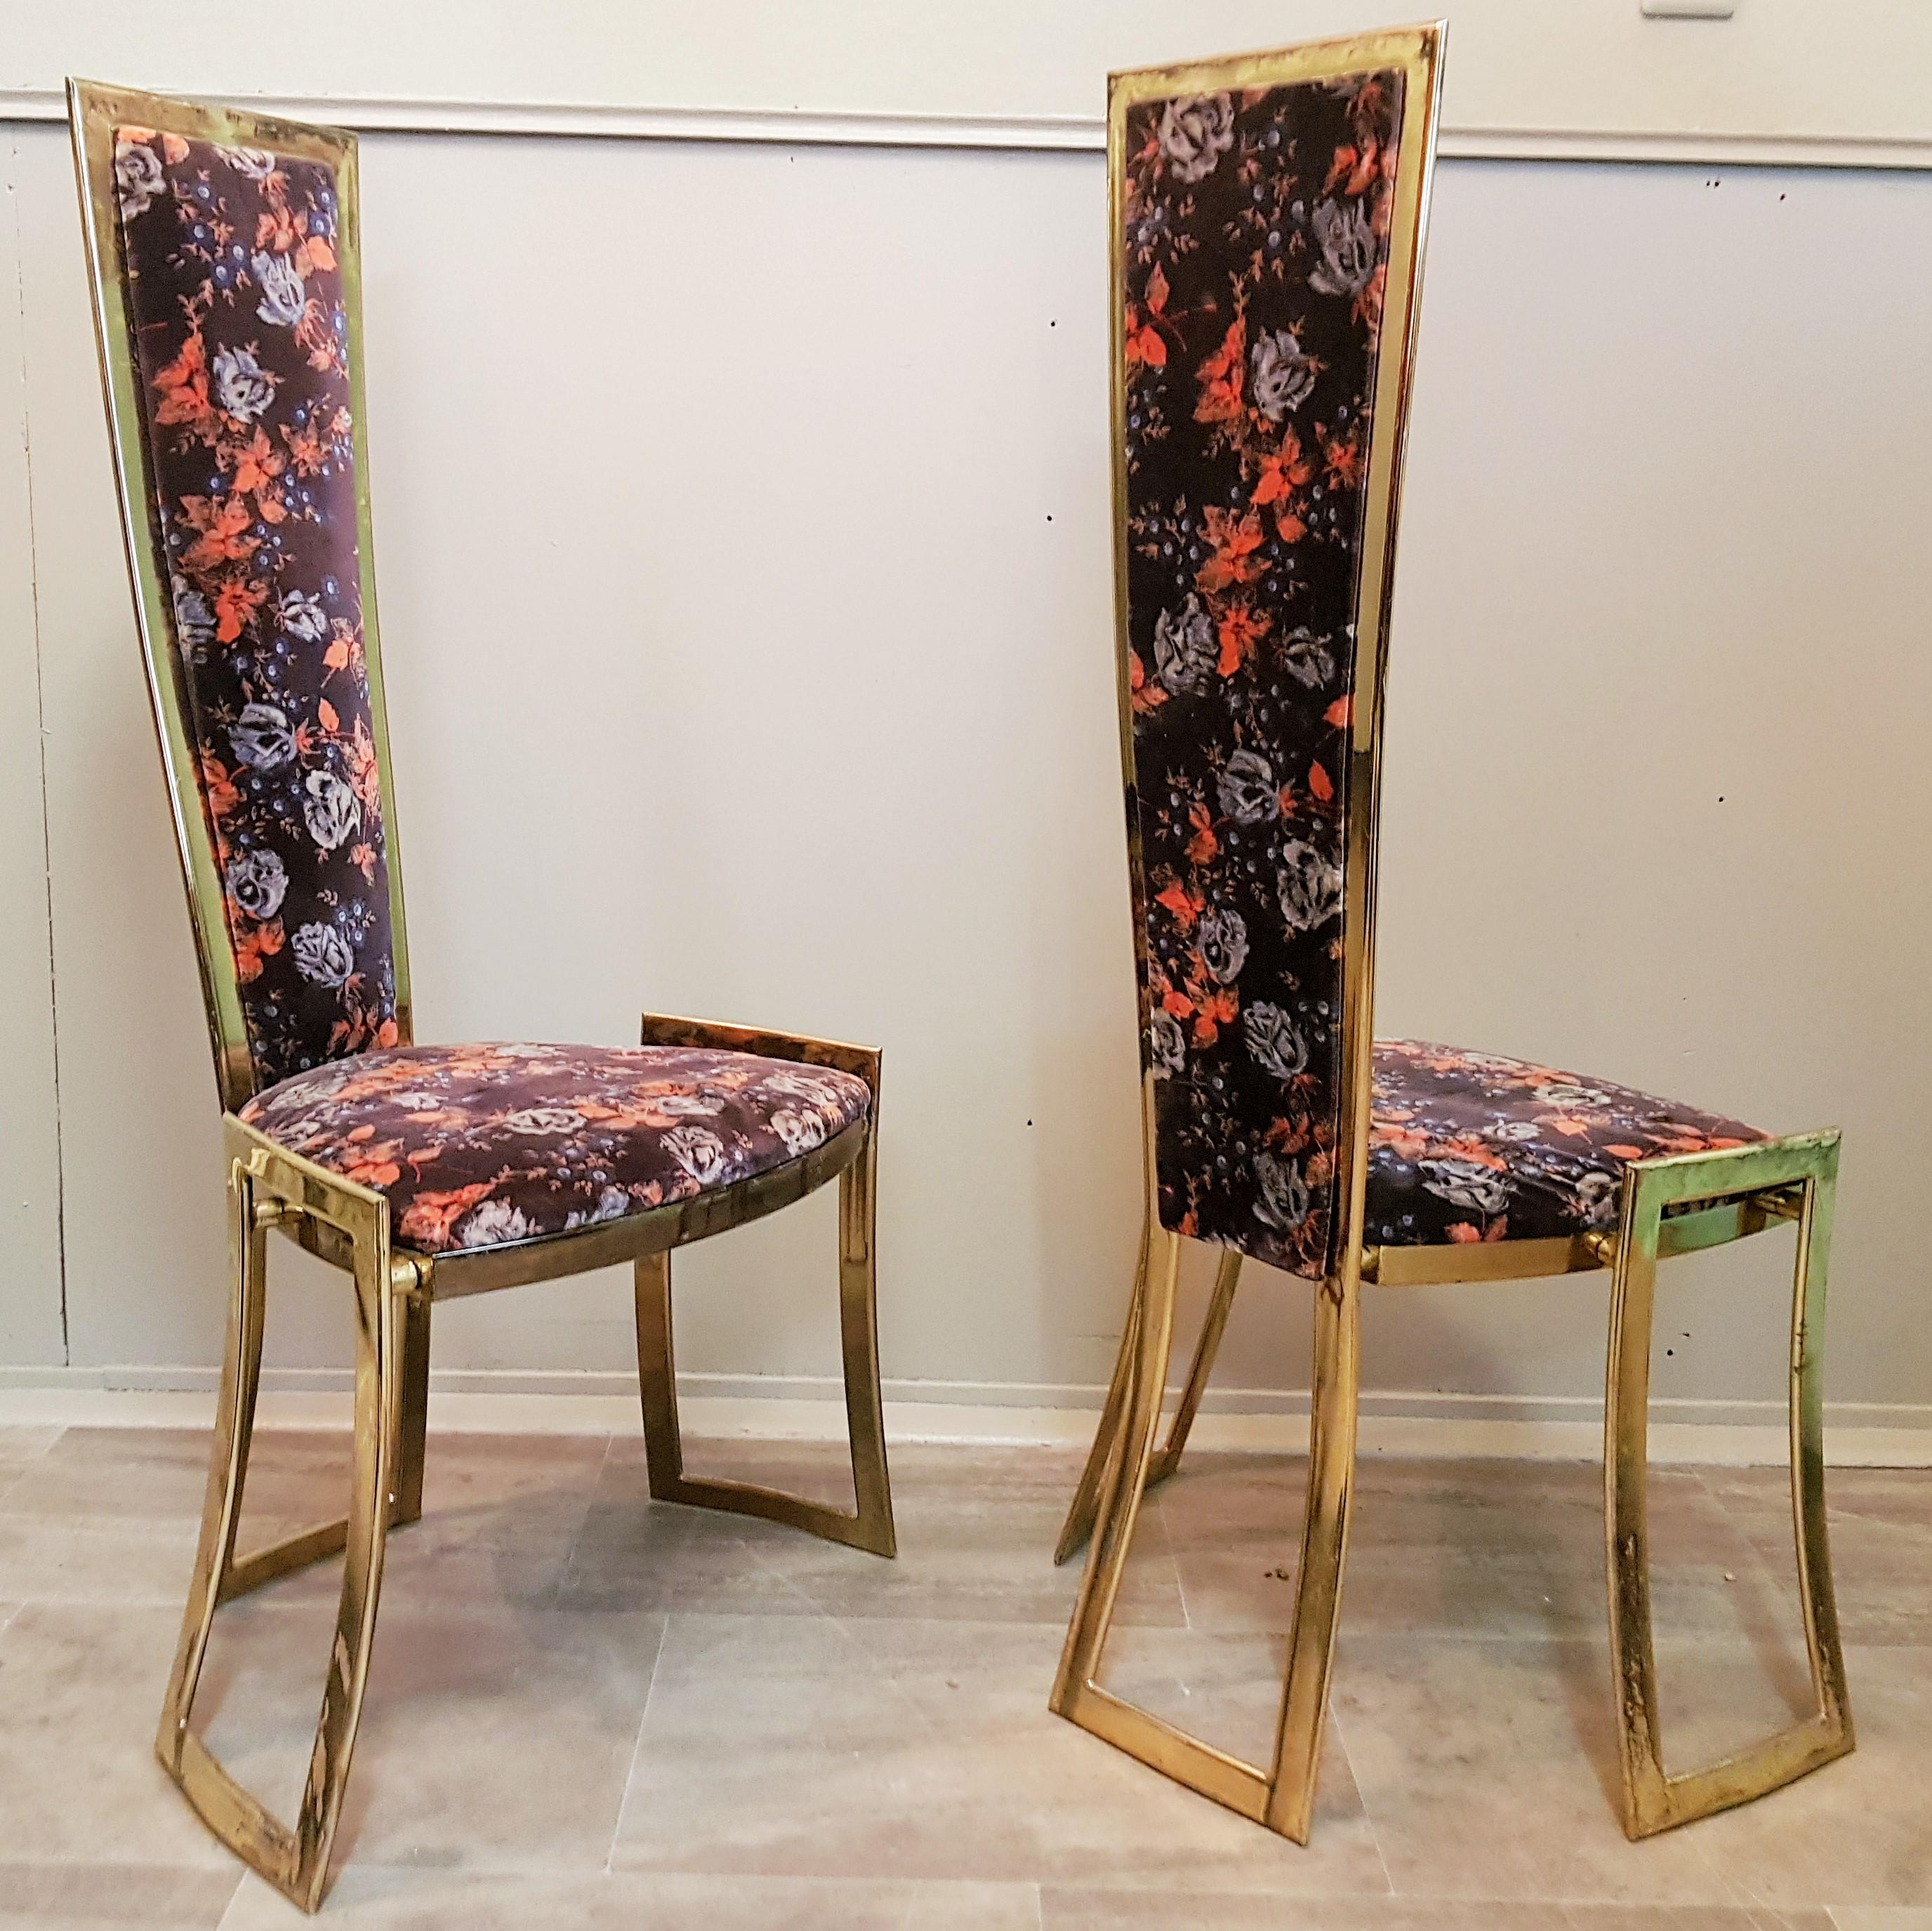 Midcentury High Back Brass Chairs Style Rizzo Hollywood Regency, France 1960s For Sale 4